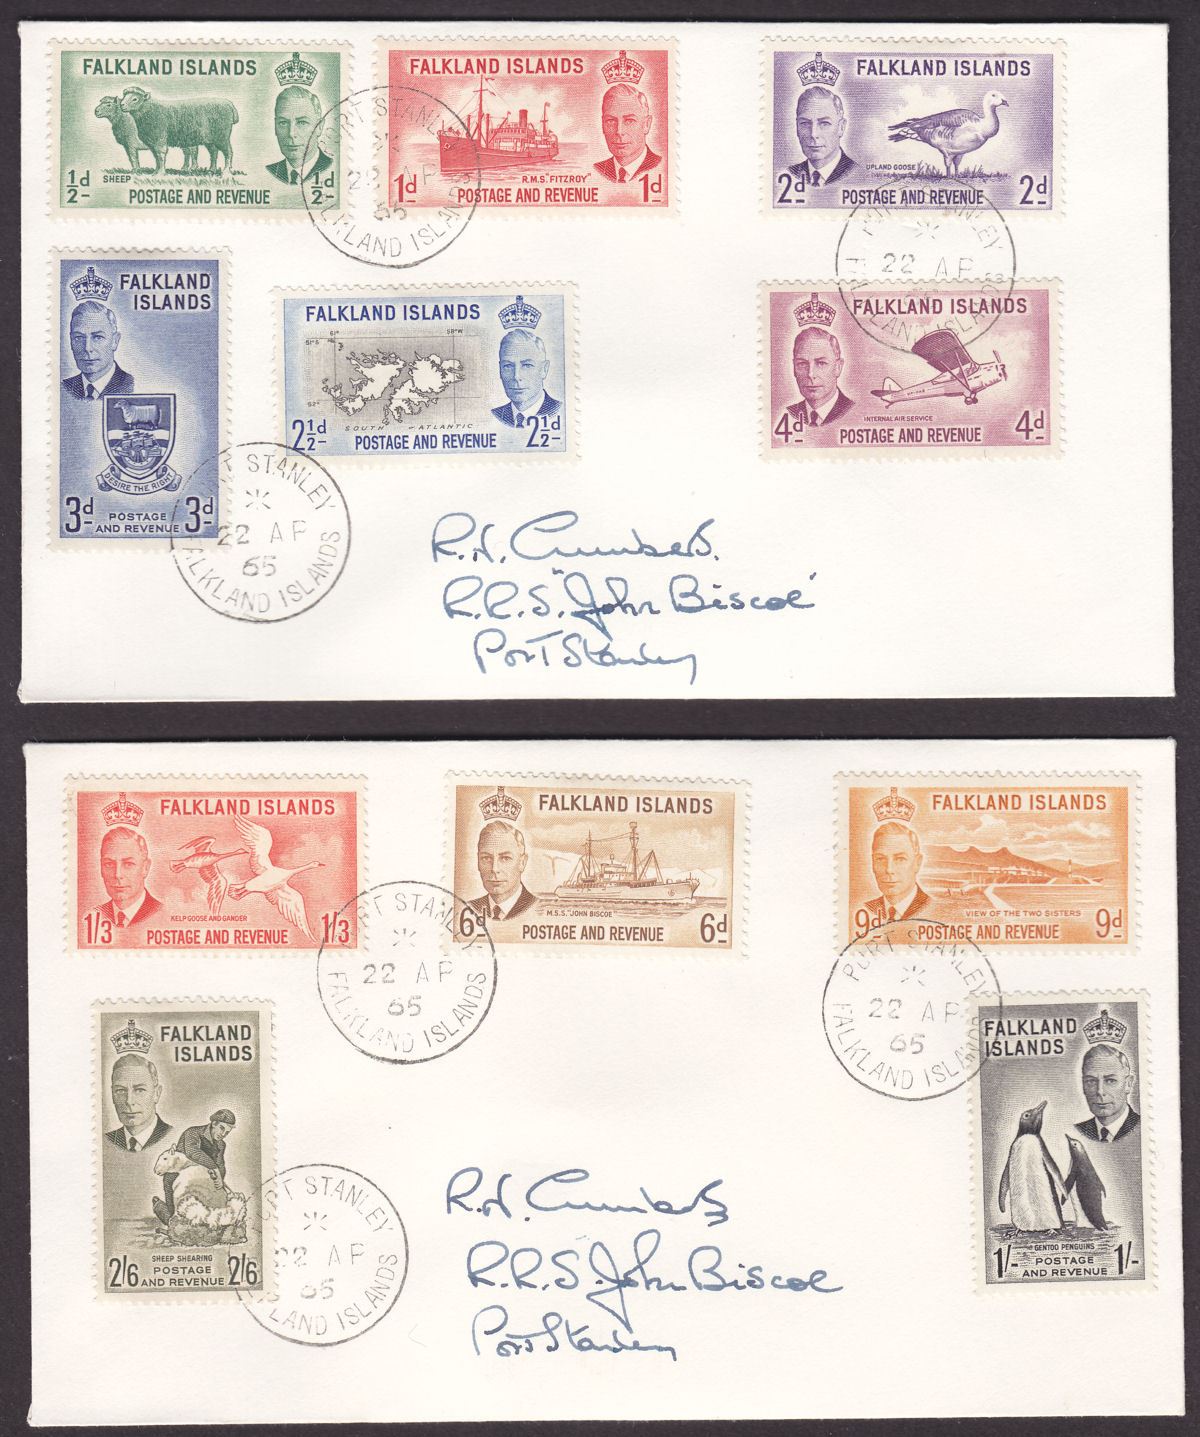 Falkland Islands 1965 KGVI Set to 2sh6d Used on Two Covers - Port Stanley Pmks